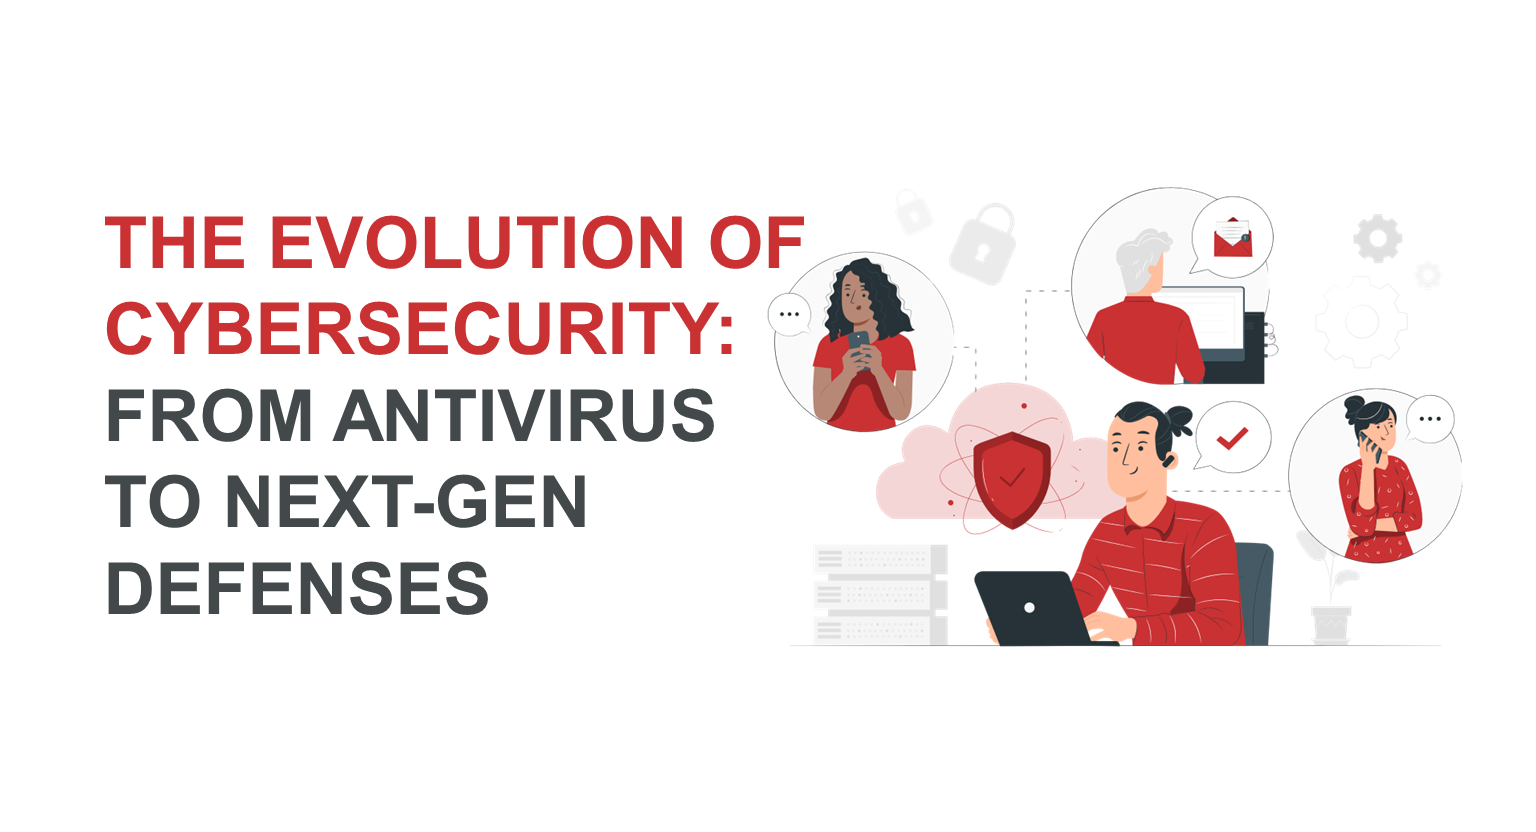 The Evolution of Cybersecurity: From Antivirus to Next-Gen Defenses